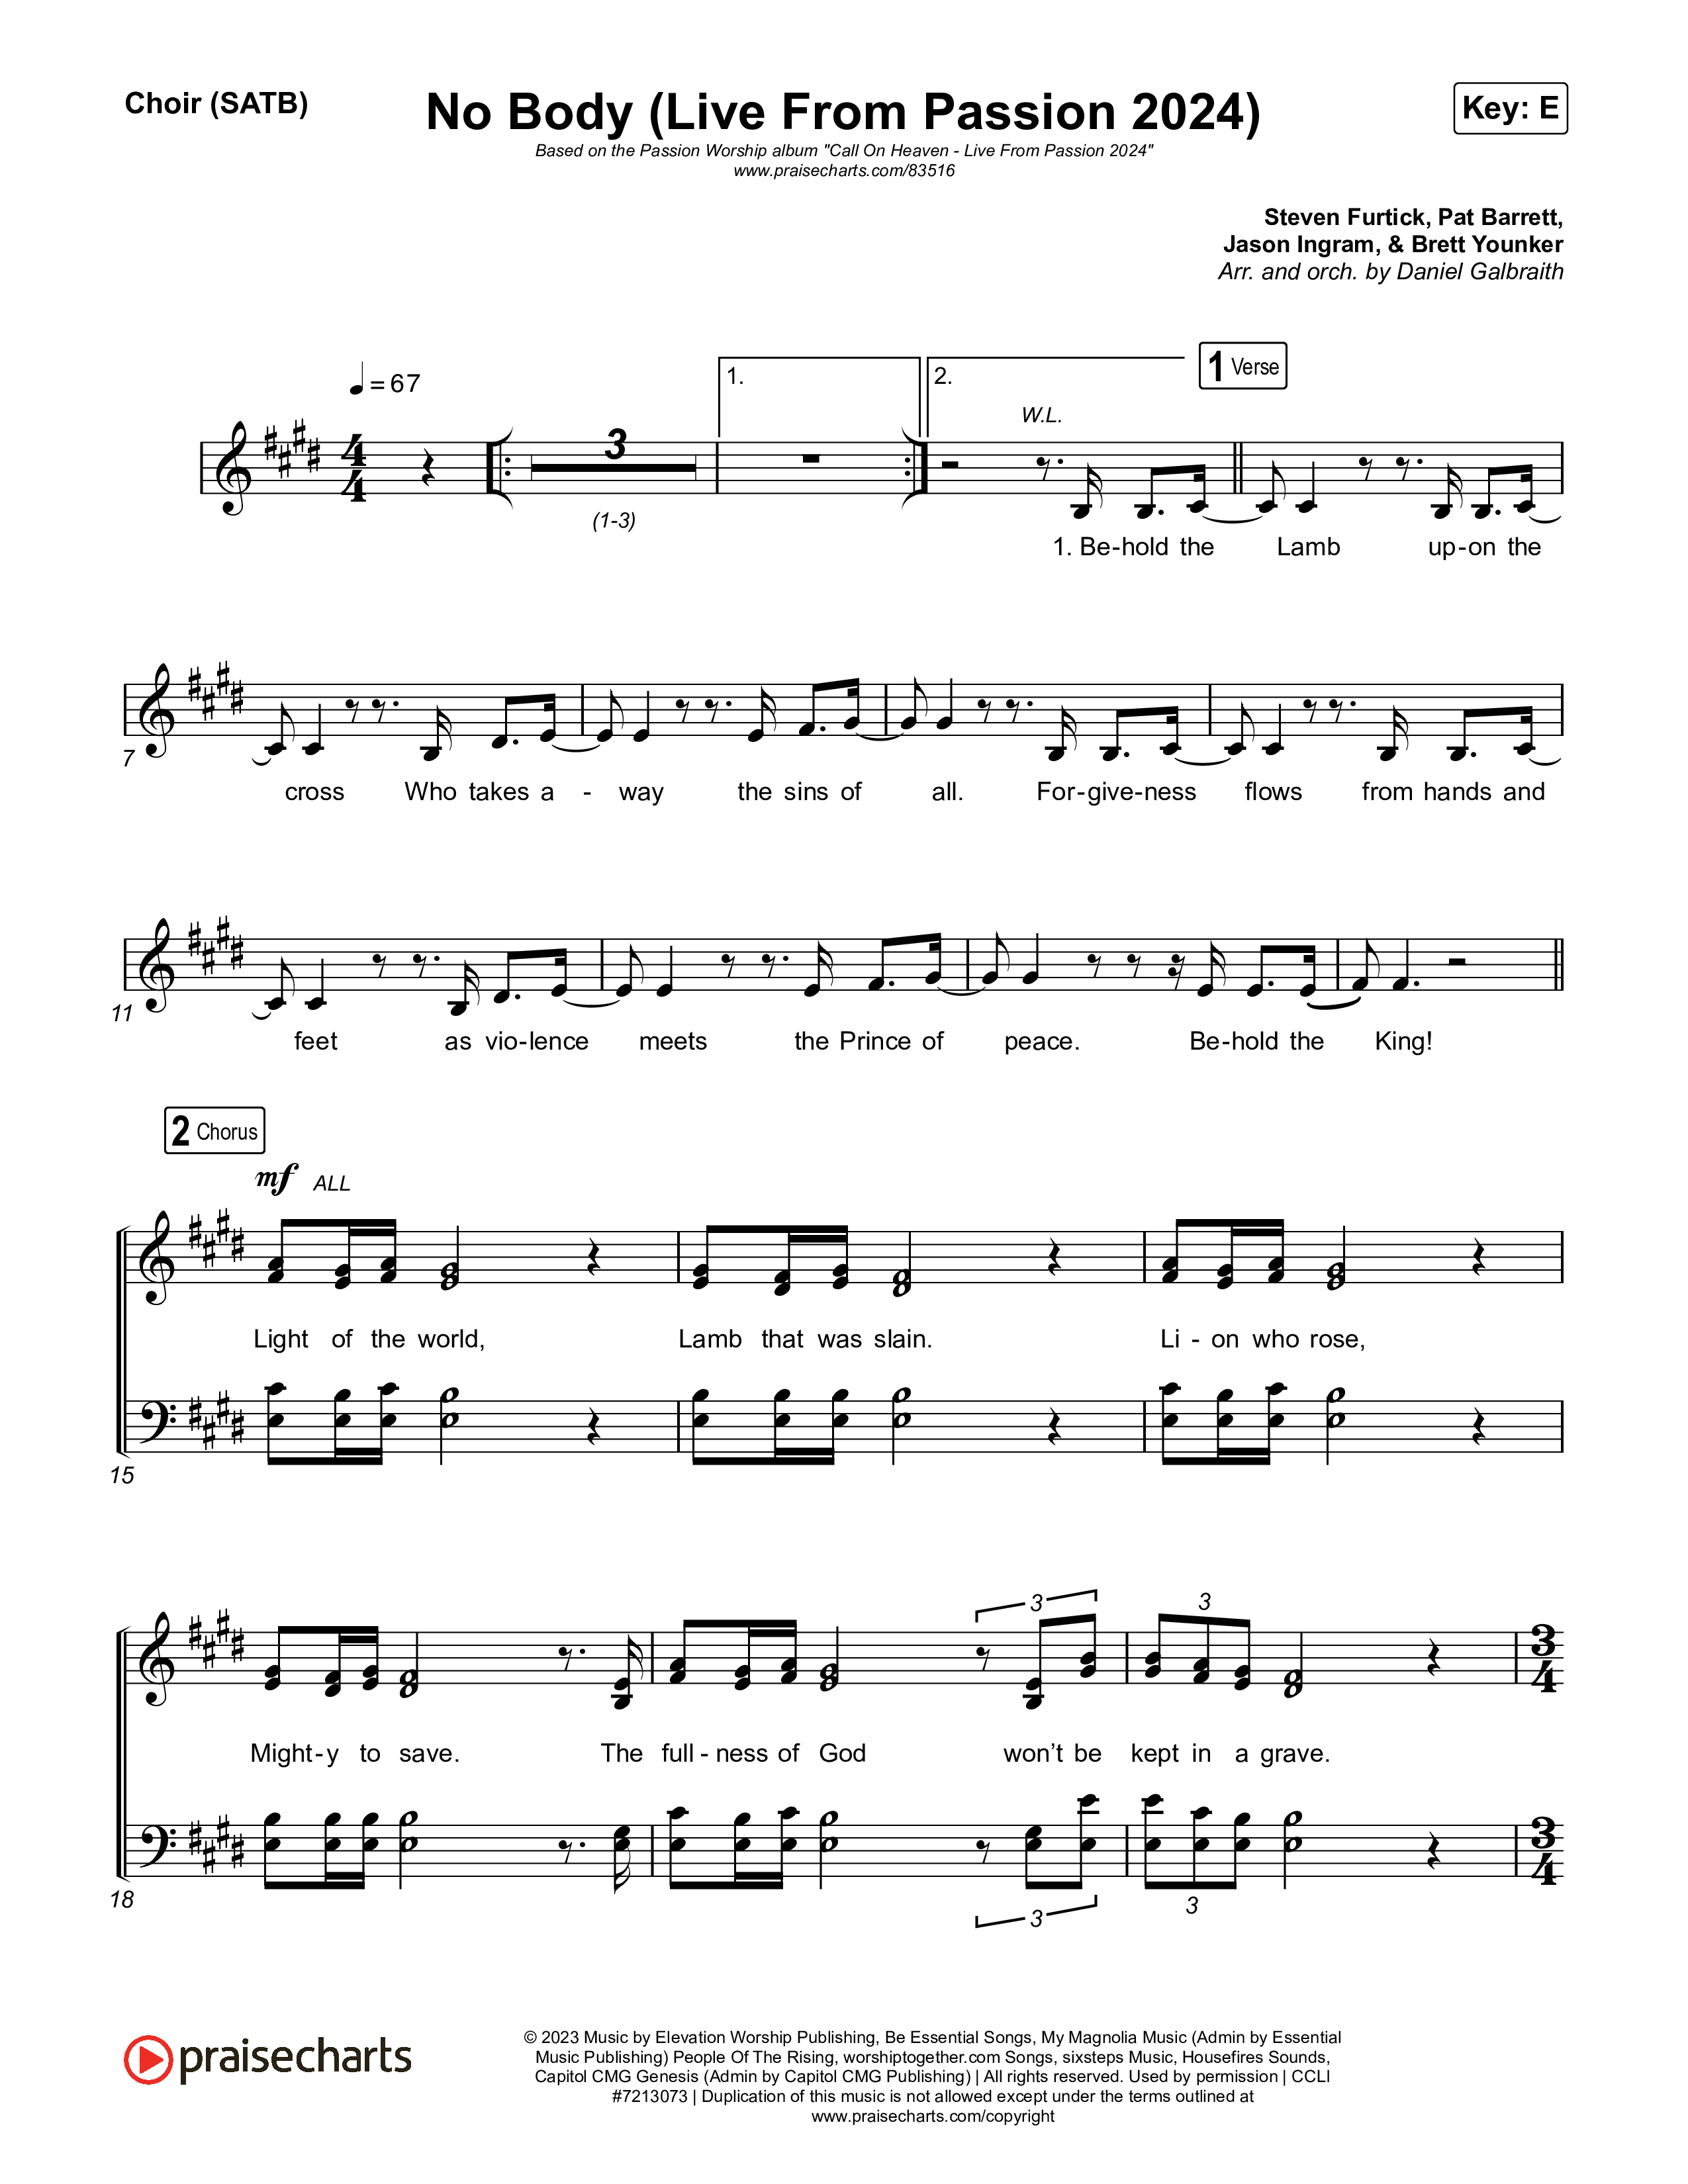 No Body (Live From Passion 2024) Choir Sheet (SATB) (Passion / Chidima)